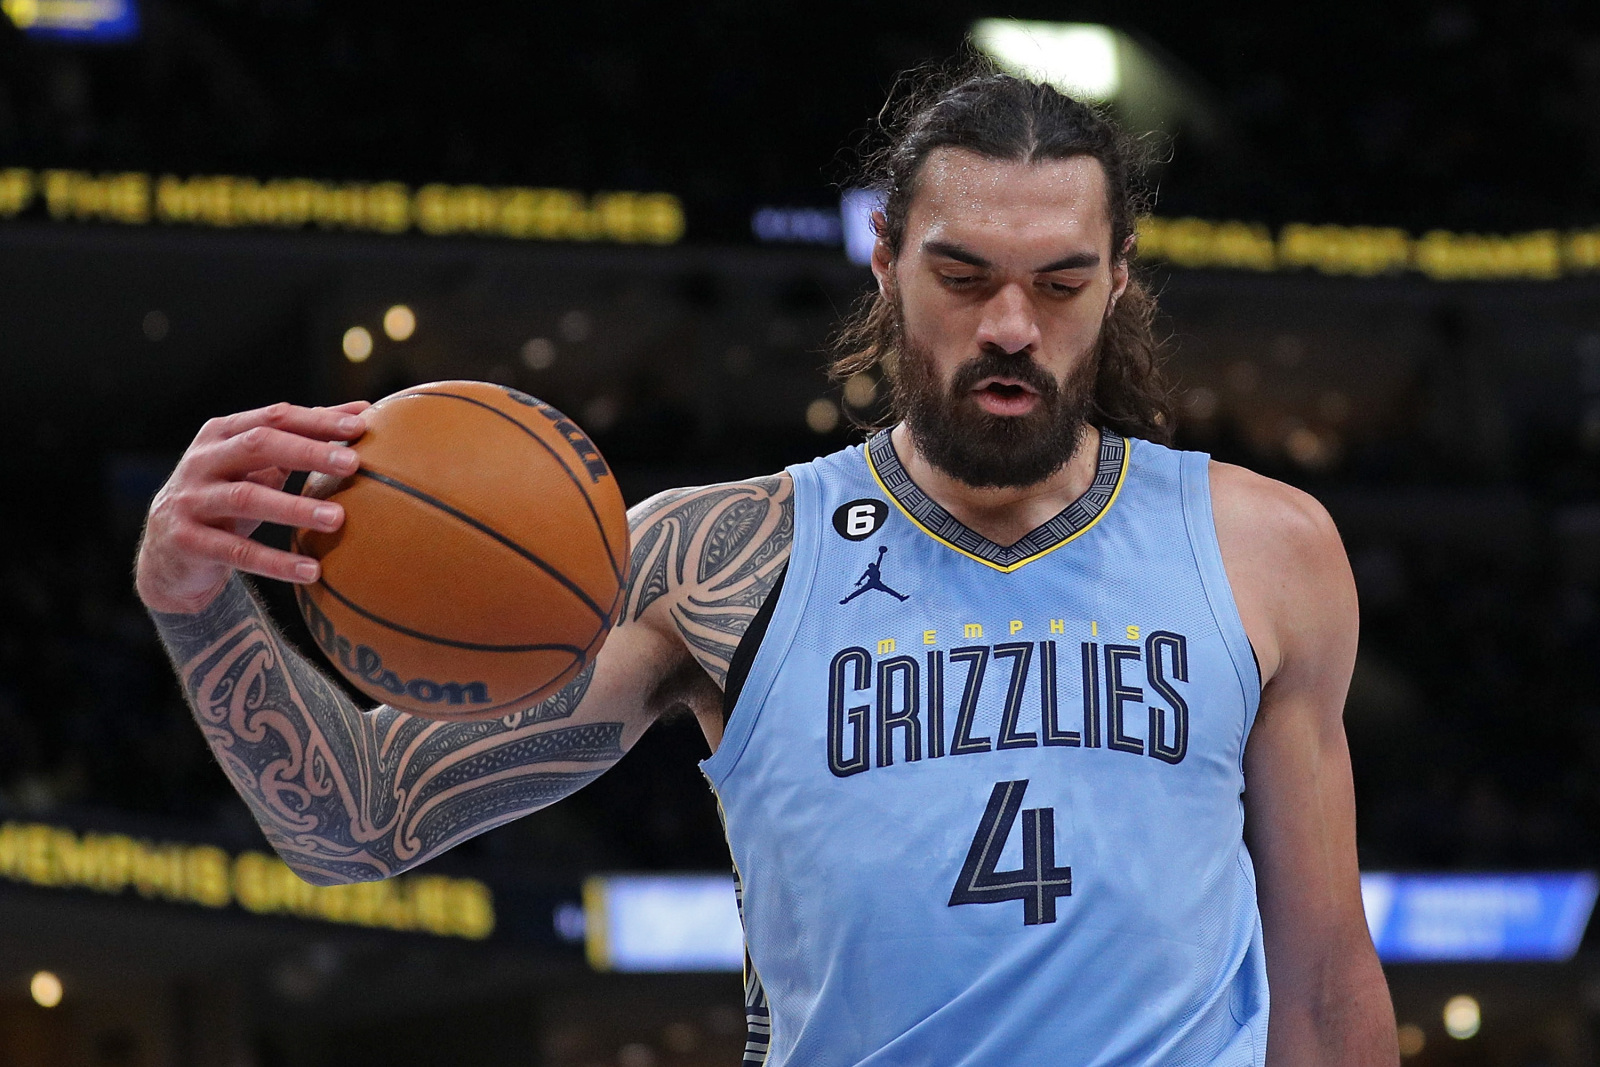 Grizz Lead on X: LIKE THIS TWEET IF YOU MISS STEVEN ADAMS AND